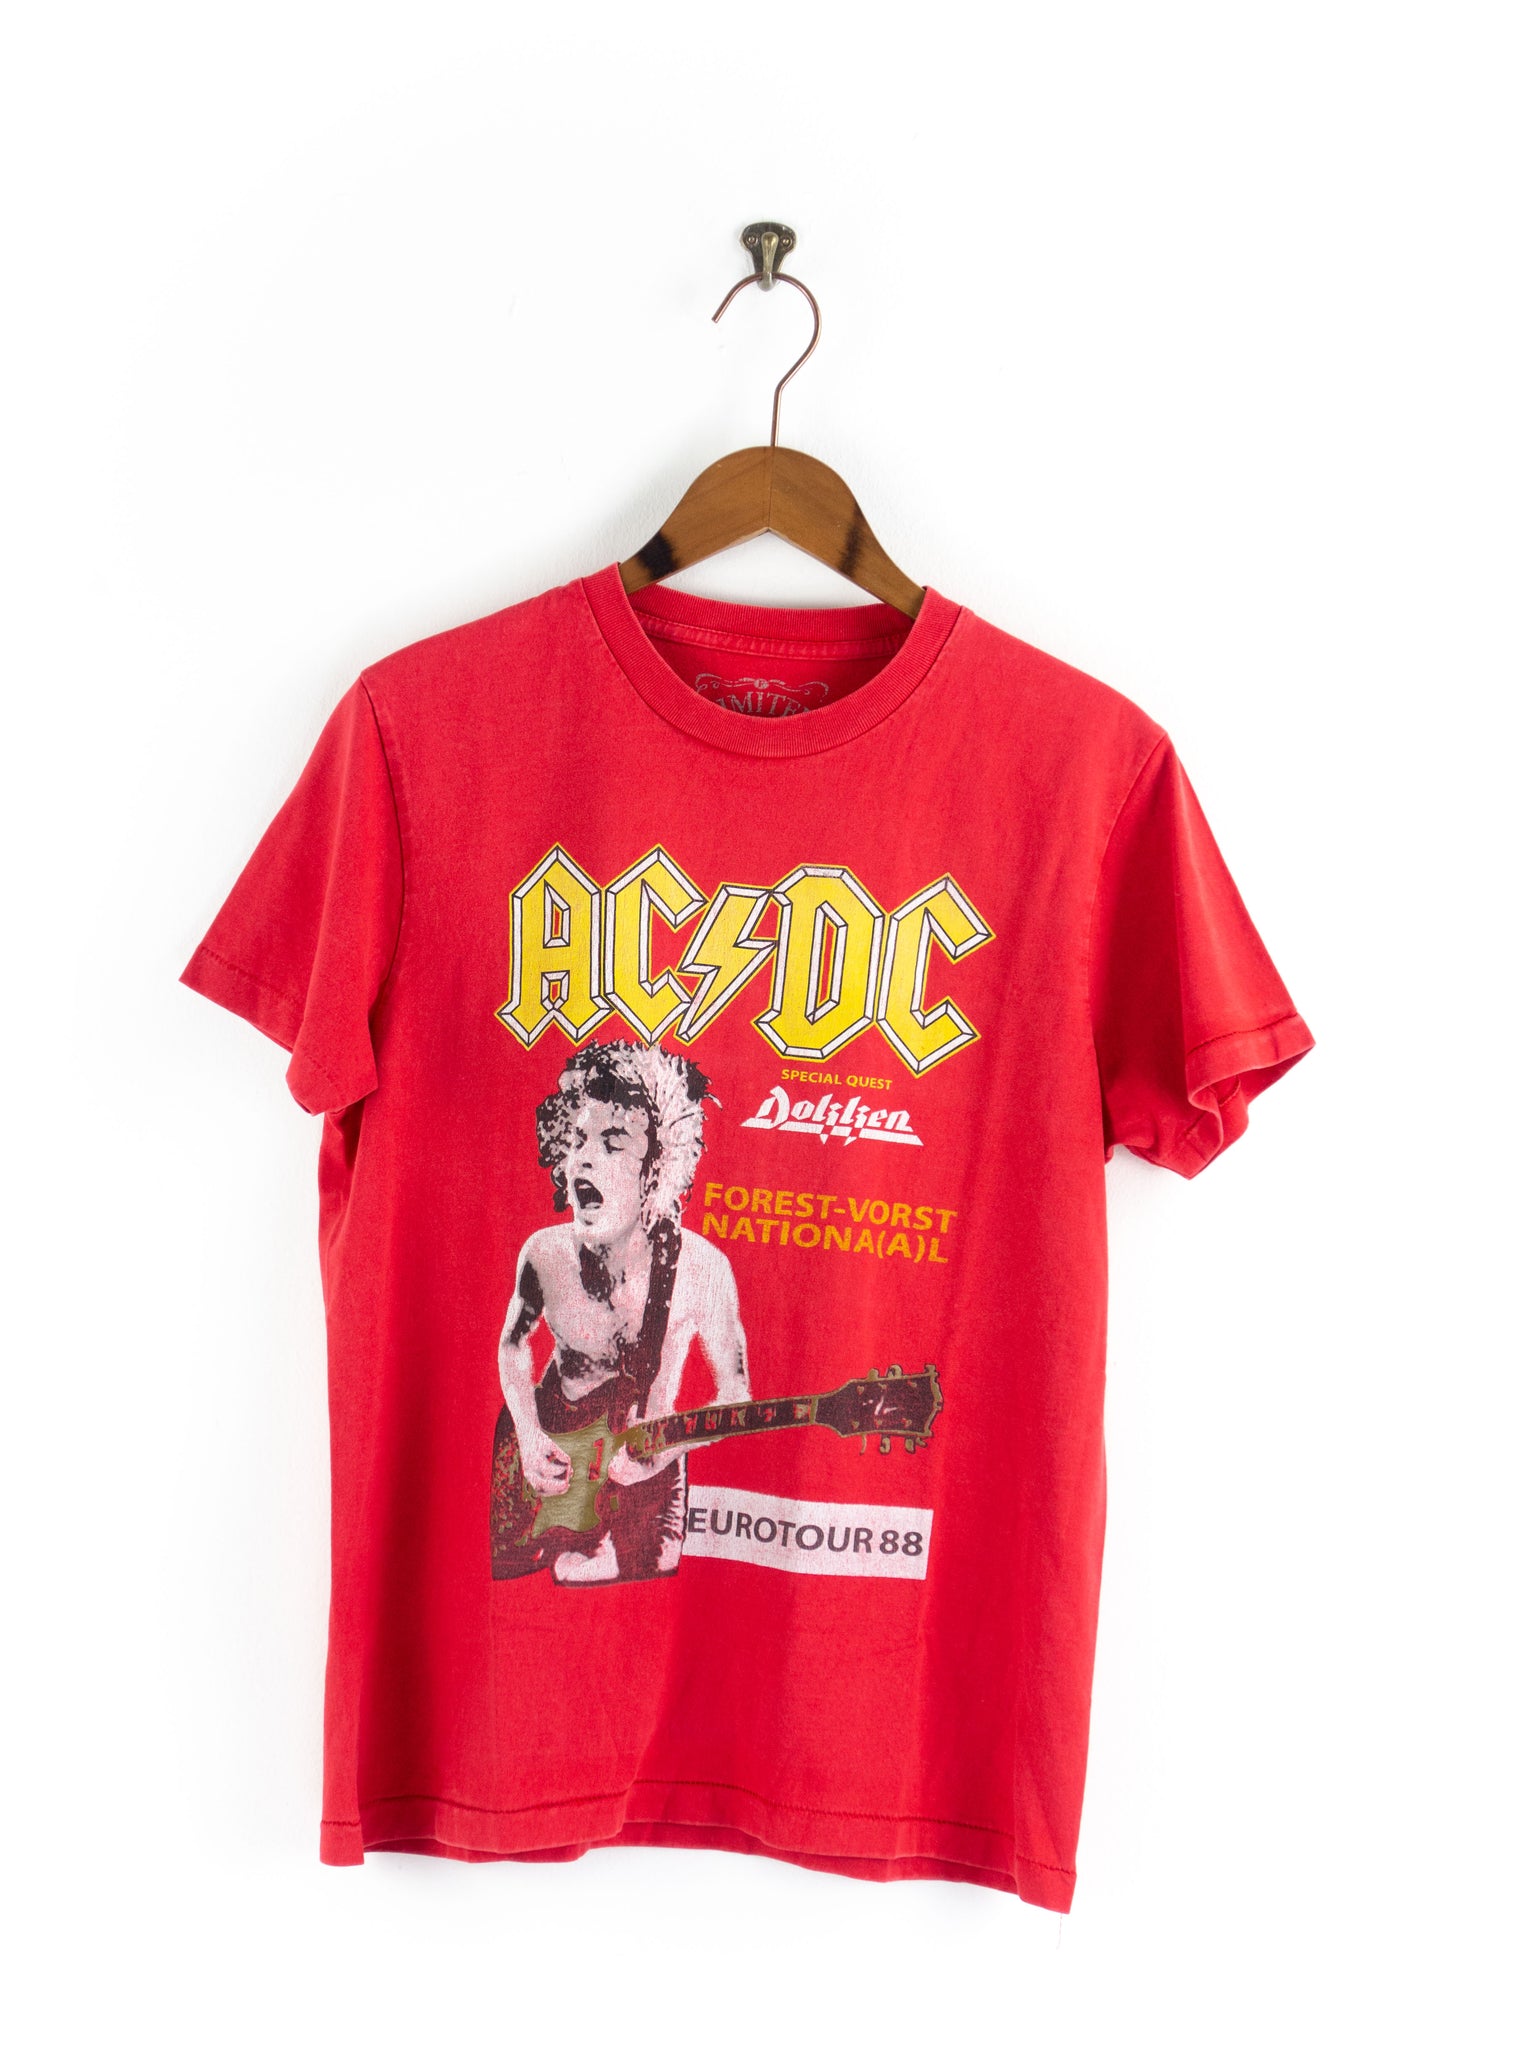 ACDC T-Shirt S/M